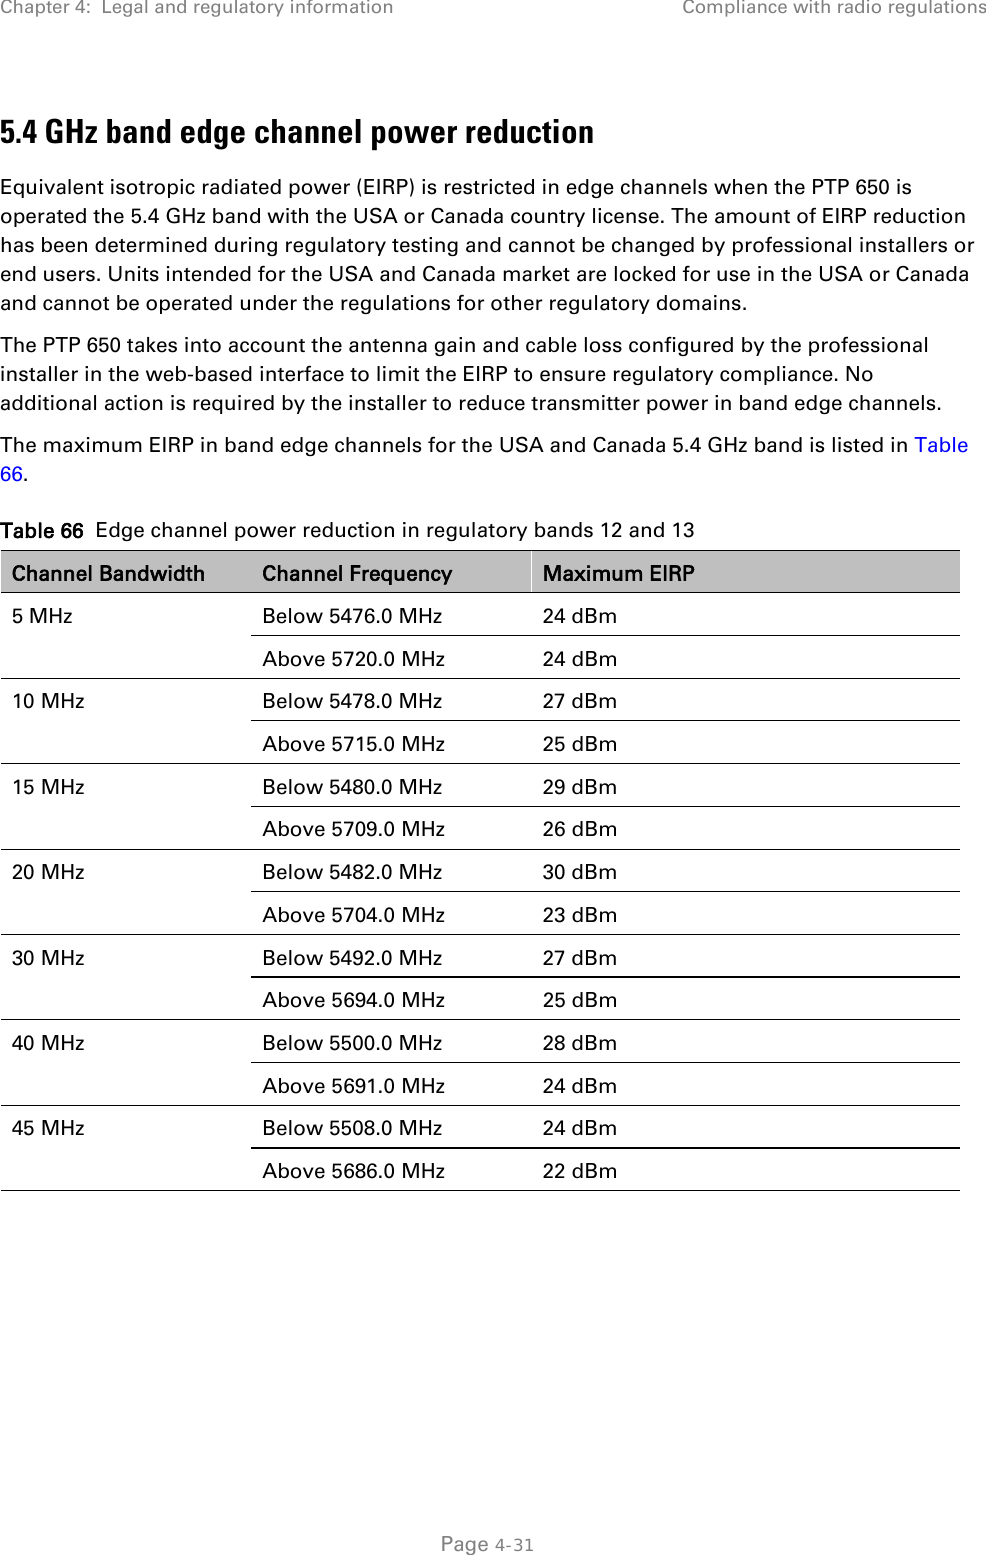 Chapter 4:  Legal and regulatory information Compliance with radio regulations  5.4 GHz band edge channel power reduction Equivalent isotropic radiated power (EIRP) is restricted in edge channels when the PTP 650 is operated the 5.4 GHz band with the USA or Canada country license. The amount of EIRP reduction has been determined during regulatory testing and cannot be changed by professional installers or end users. Units intended for the USA and Canada market are locked for use in the USA or Canada and cannot be operated under the regulations for other regulatory domains. The PTP 650 takes into account the antenna gain and cable loss configured by the professional installer in the web-based interface to limit the EIRP to ensure regulatory compliance. No additional action is required by the installer to reduce transmitter power in band edge channels. The maximum EIRP in band edge channels for the USA and Canada 5.4 GHz band is listed in Table 66. Table 66  Edge channel power reduction in regulatory bands 12 and 13 Channel Bandwidth Channel Frequency Maximum EIRP 5 MHz Below 5476.0 MHz 24 dBm Above 5720.0 MHz 24 dBm 10 MHz Below 5478.0 MHz 27 dBm Above 5715.0 MHz 25 dBm 15 MHz Below 5480.0 MHz 29 dBm Above 5709.0 MHz 26 dBm 20 MHz Below 5482.0 MHz 30 dBm Above 5704.0 MHz 23 dBm 30 MHz Below 5492.0 MHz 27 dBm Above 5694.0 MHz 25 dBm 40 MHz Below 5500.0 MHz  28 dBm Above 5691.0 MHz  24 dBm 45 MHz Below 5508.0 MHz 24 dBm Above 5686.0 MHz 22 dBm   Page 4-31 